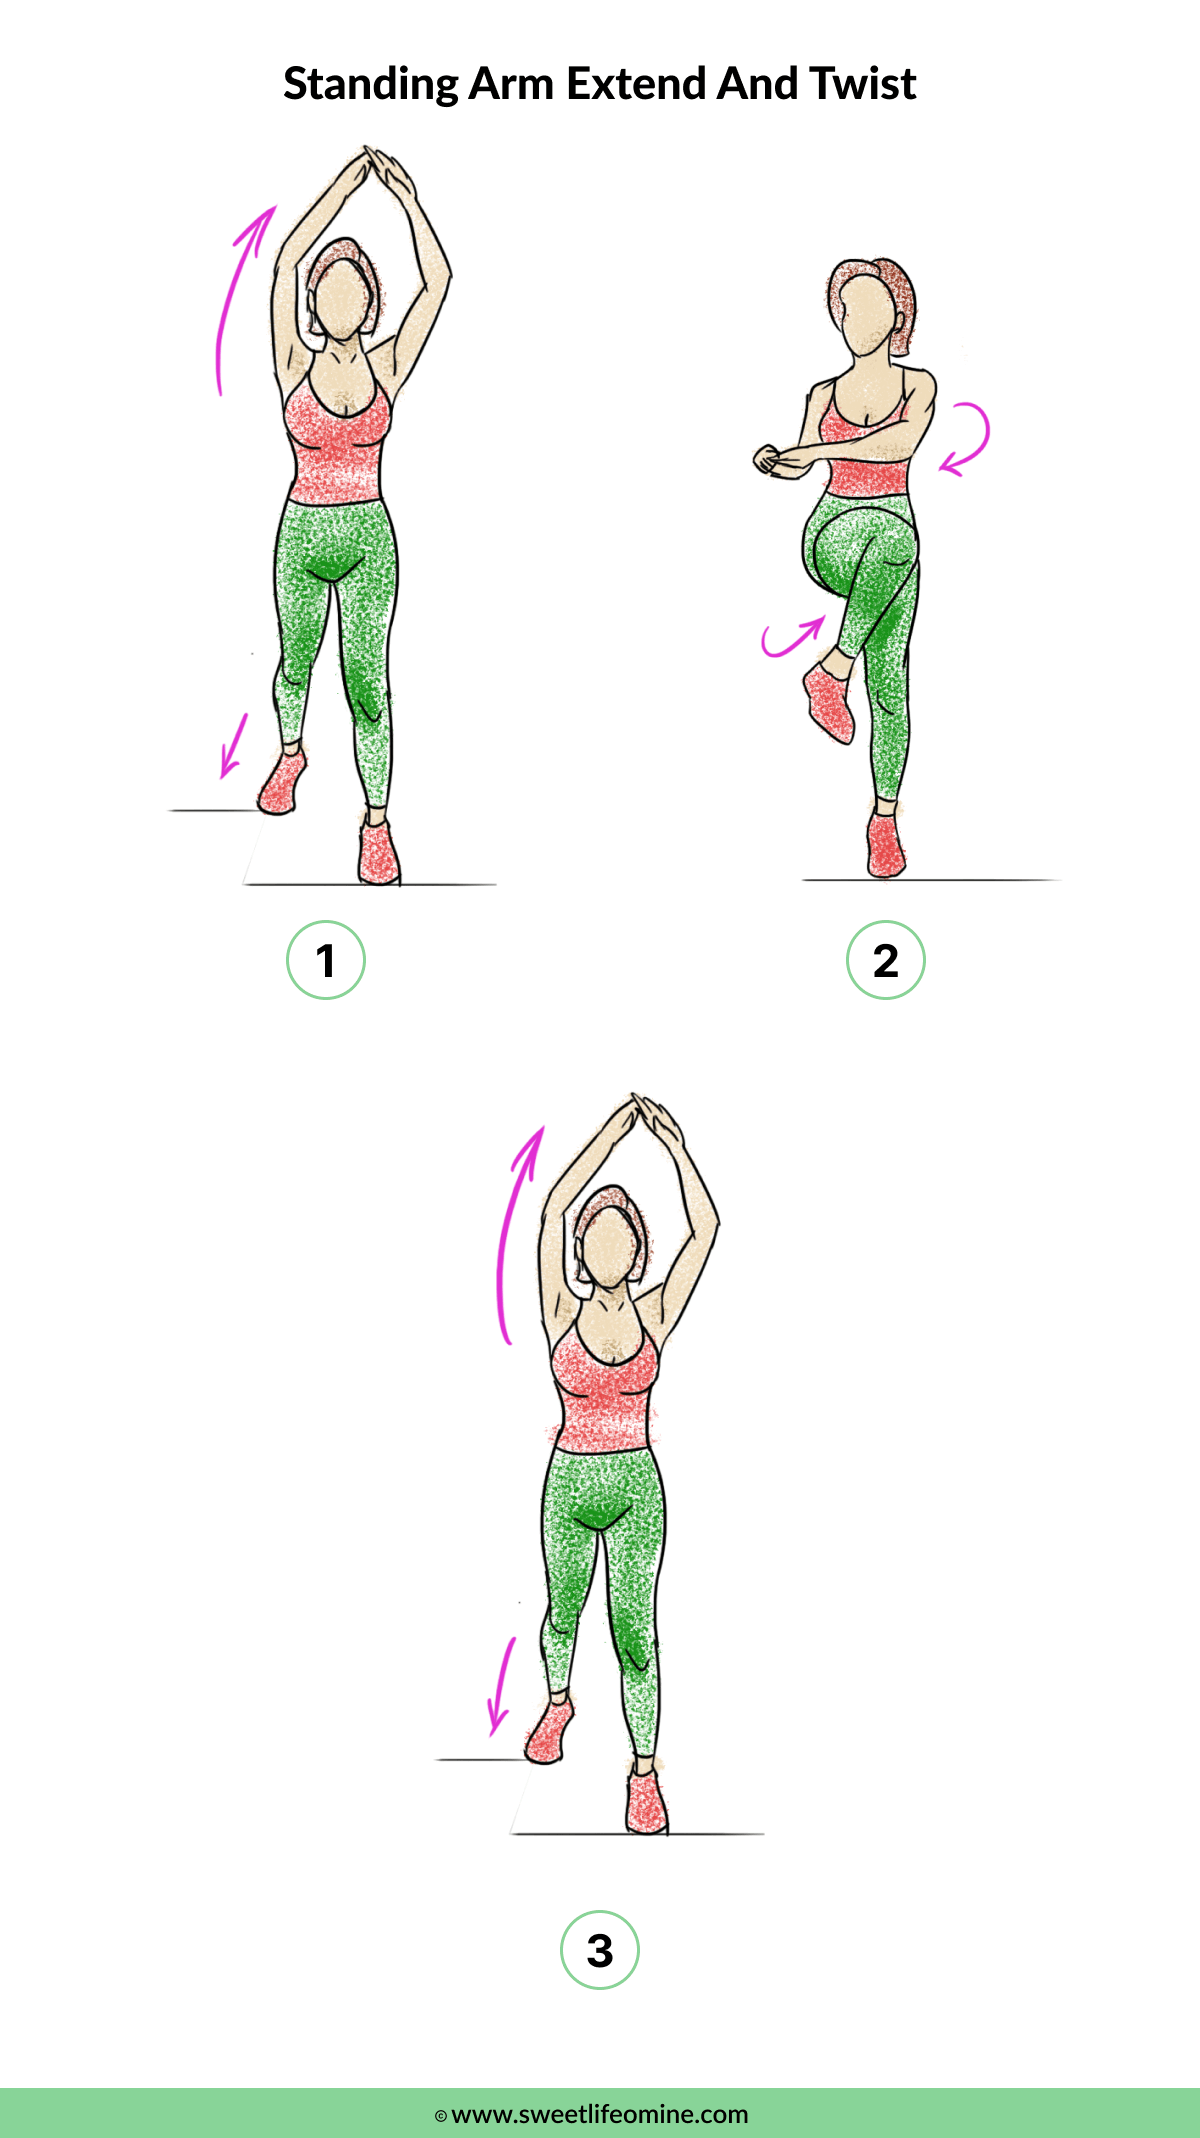 Standing Arm Extend And Twist - Muffin Top Exercise